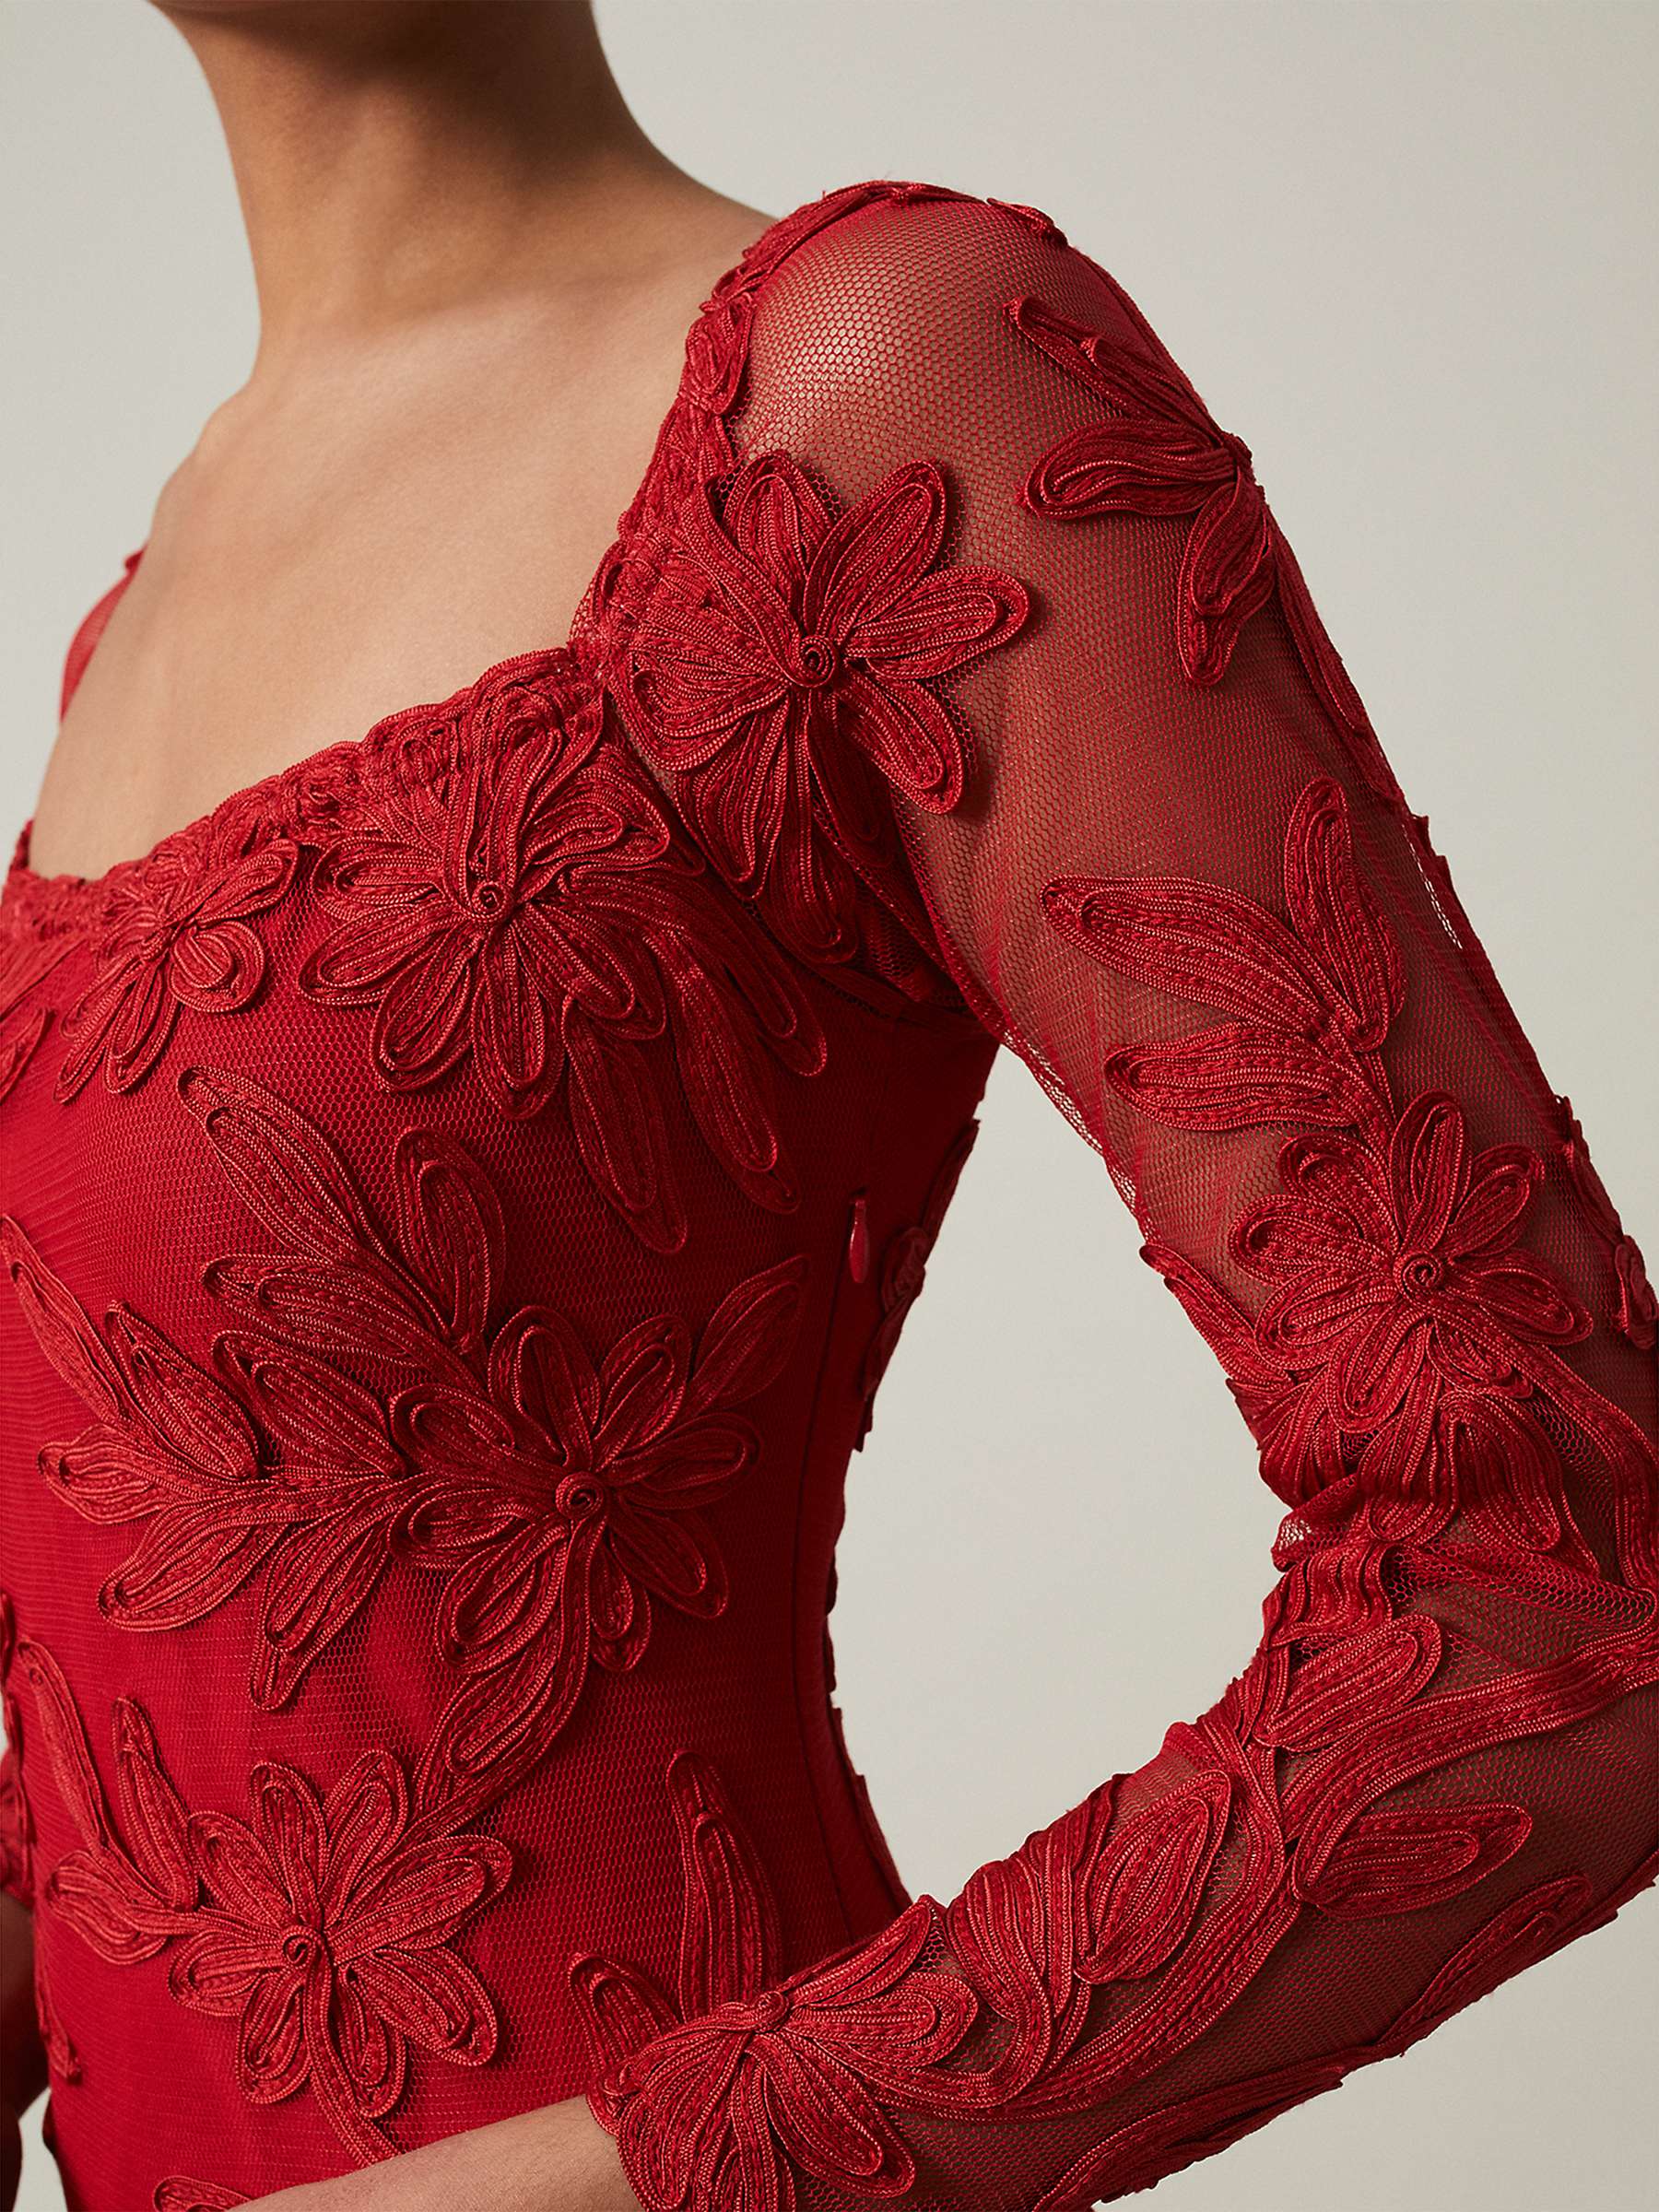 Buy Phase Eight Alicia Tapework Lace Dress, Scarlet Online at johnlewis.com